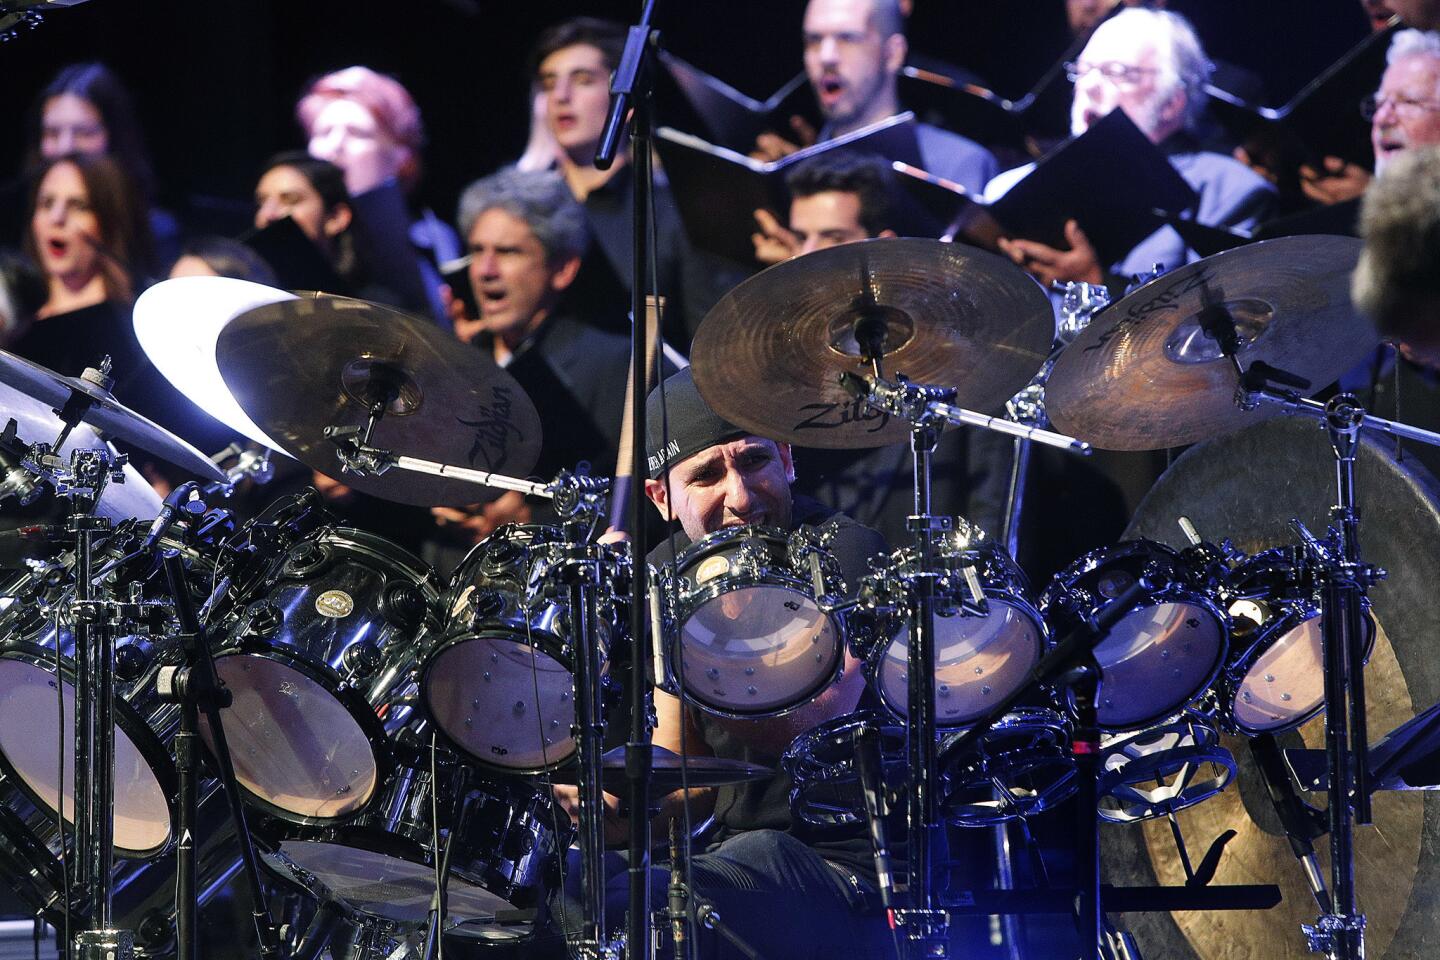 Musician Jacob Armen plays on an enormous drum set with the Homenetmen Ararat Chapter Choir and the Glendale College Concert Singers at the City of Glendale's 18th annual Armenian Genocide commemorative event at the Alex Theatre on Wednesday, April 24, 2019. Marking 104 years from the start of the Armenian Genocide, U.S. Congressman Adam Schiff, State Senator Anthony Portantino, and Ambassador Armen Baibourtian of the Consul General of Armenia in Los Angeles spoke.